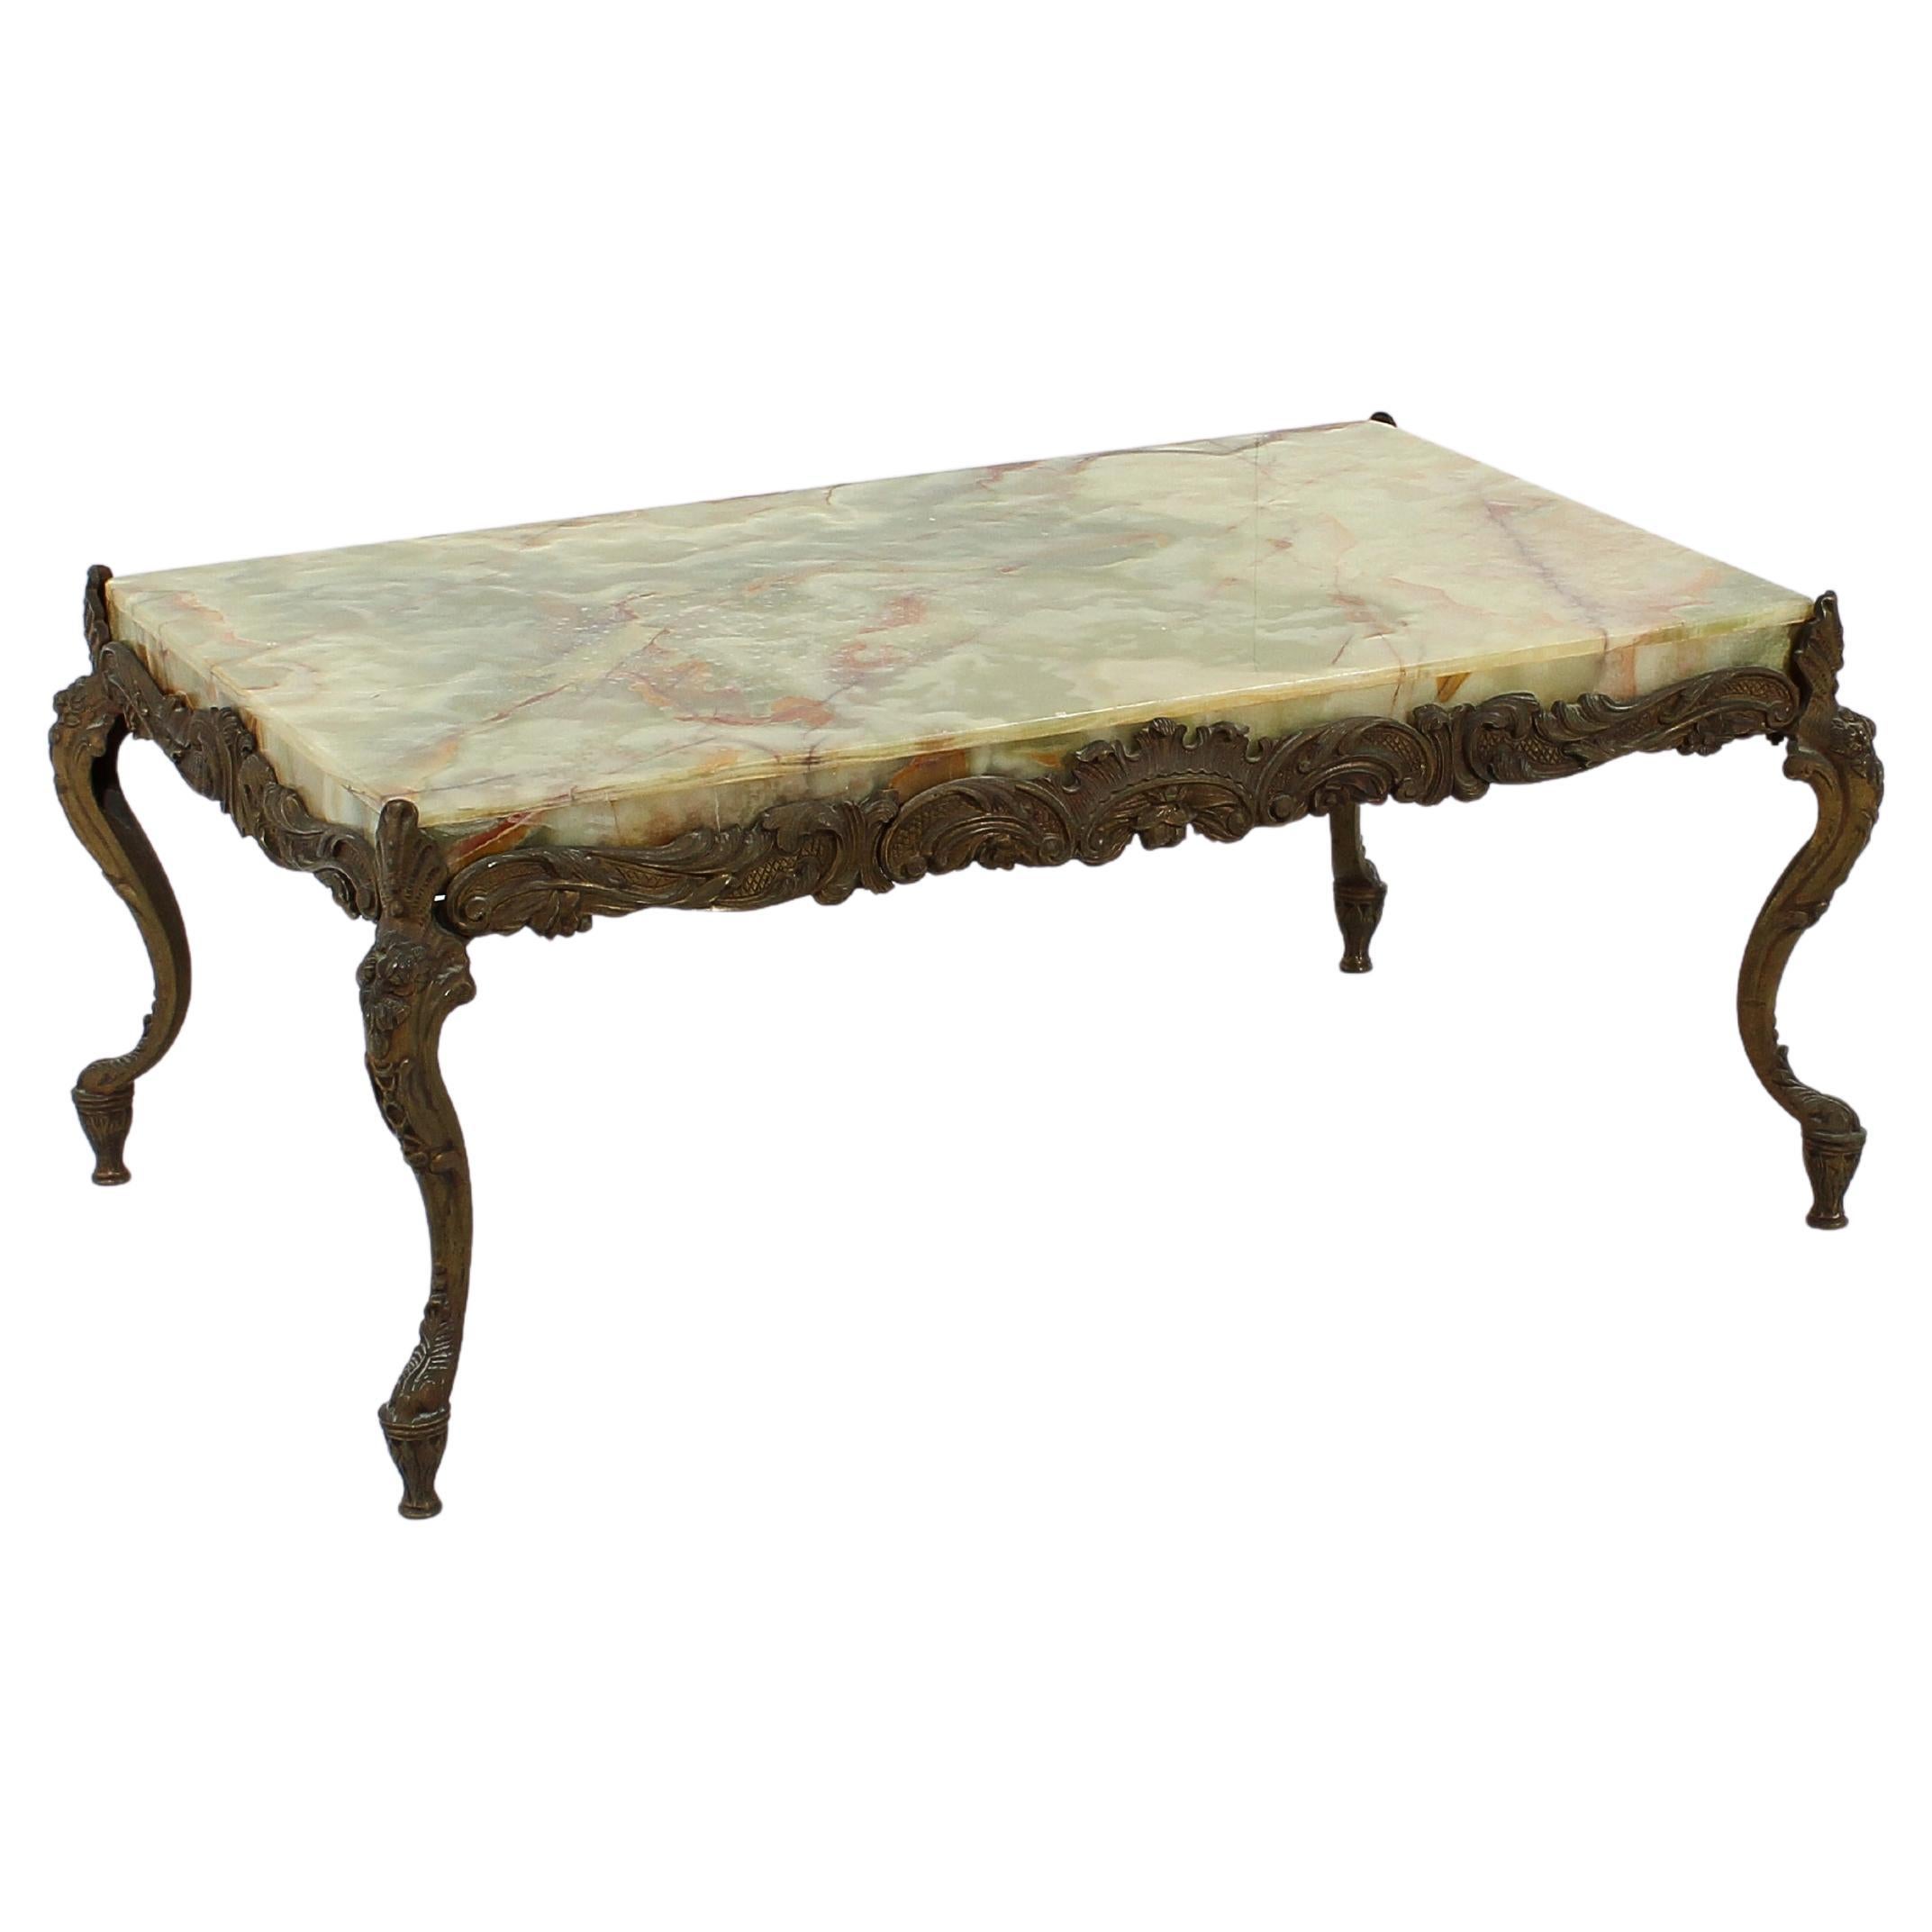 Midcentury Chippendale Style Bronze and Onyx Coffee Table, Italy, 1950s For Sale